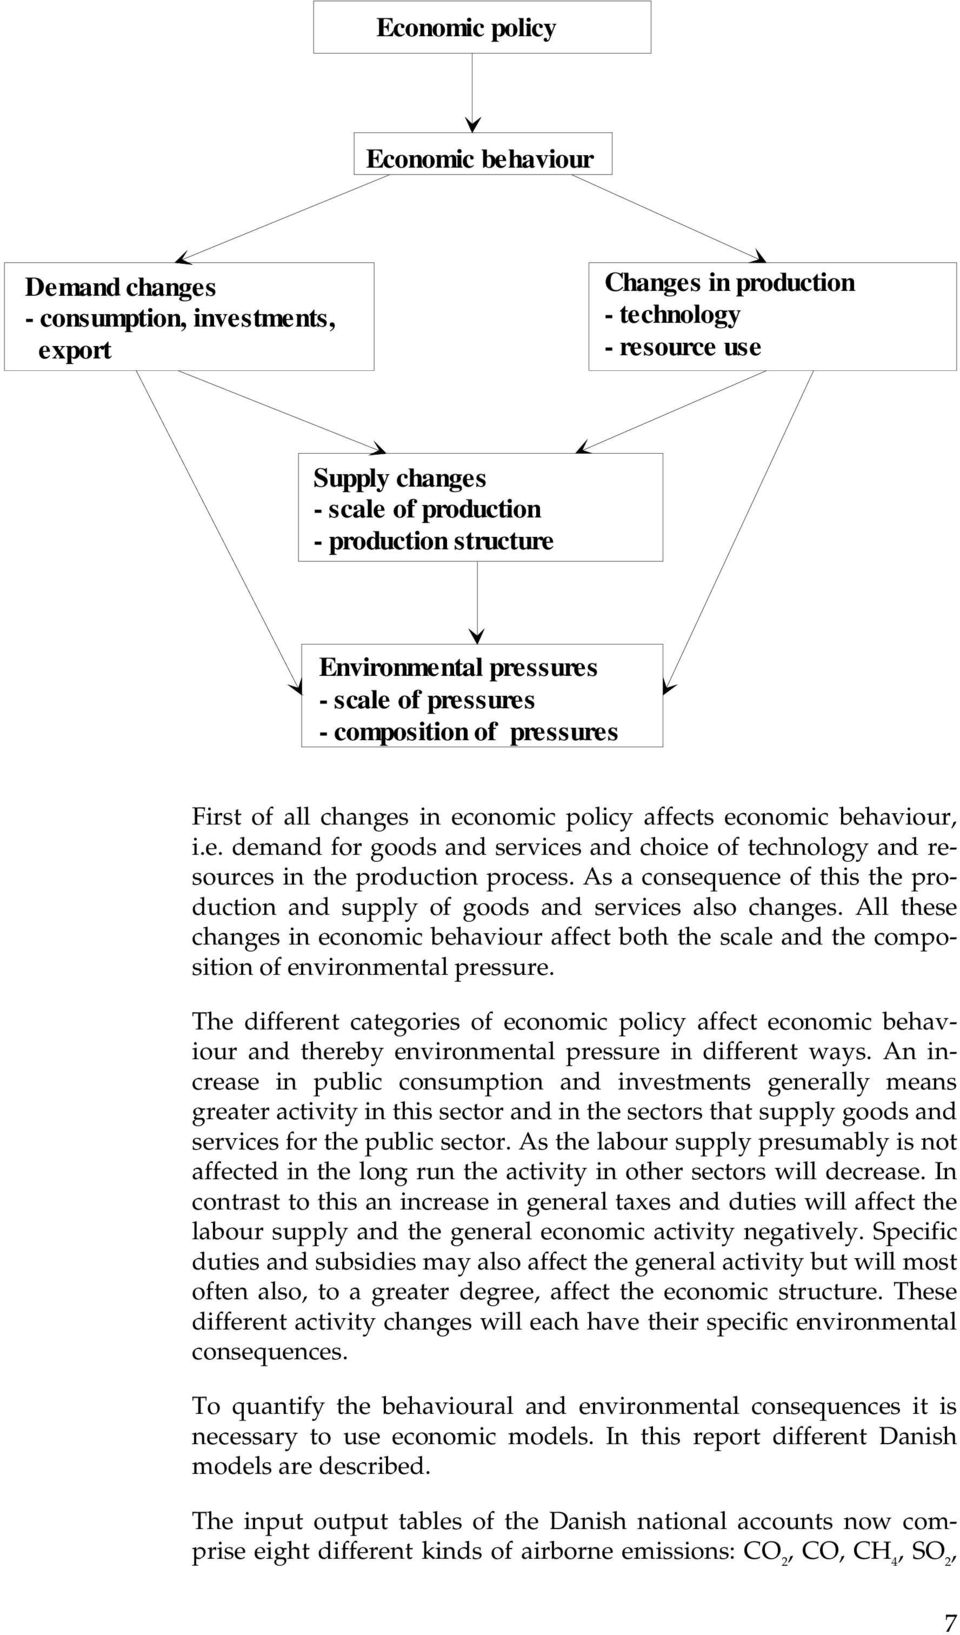 pressures - composition - sammensætning of pressures First of all changes in economic policy affects economic behaviour, i.e. demand for goods and services and choice of technology and resources in the production process.